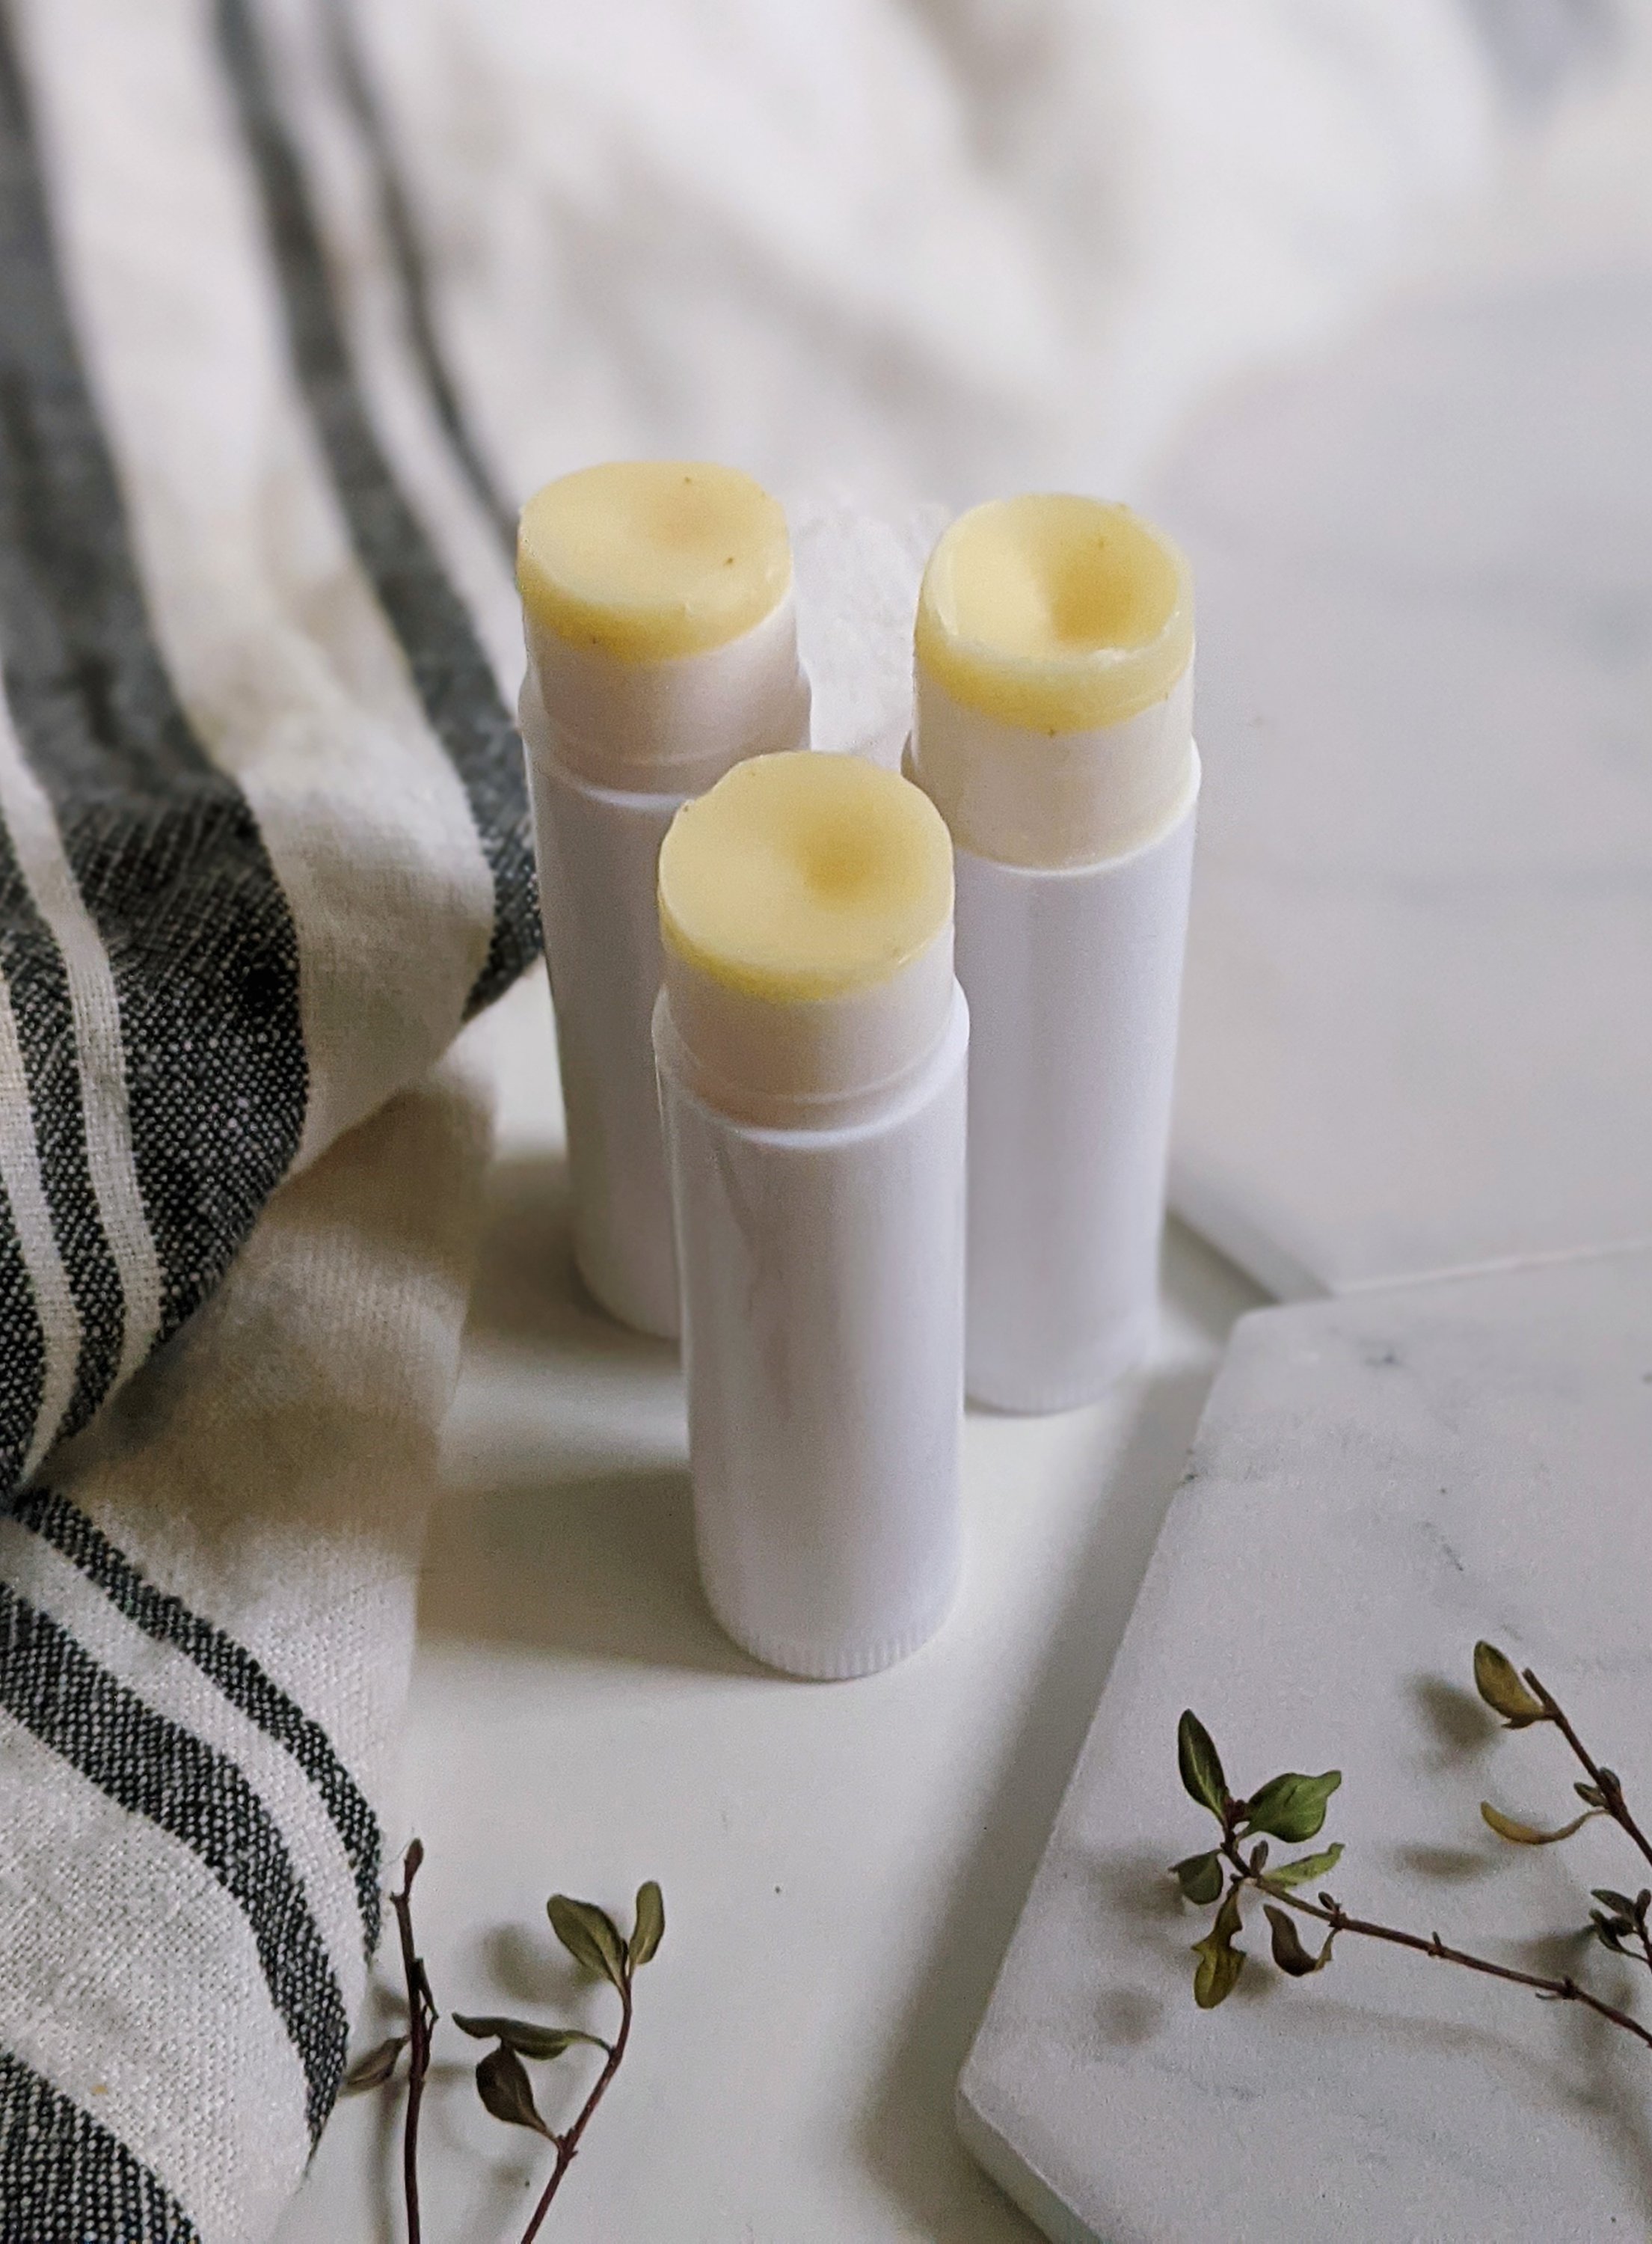 easy diy crafts to make with kids for winter chapped lip relief the best lip moisturizer all natural beauty homemade